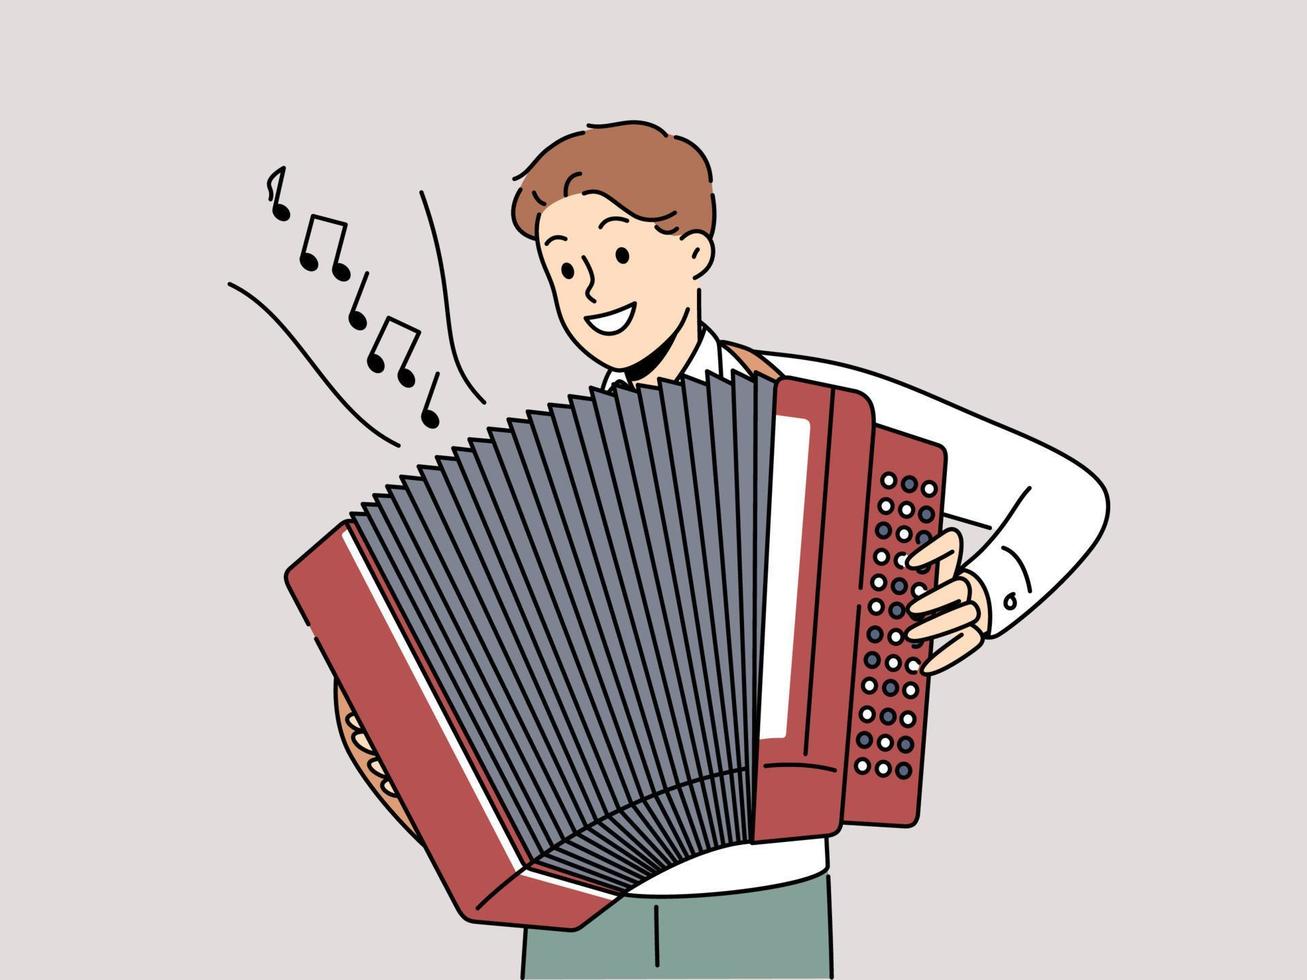 Smiling man playing on accordion. Happy male play music on traditional musical instrument. Entertainment and hobby. Vector illustration.